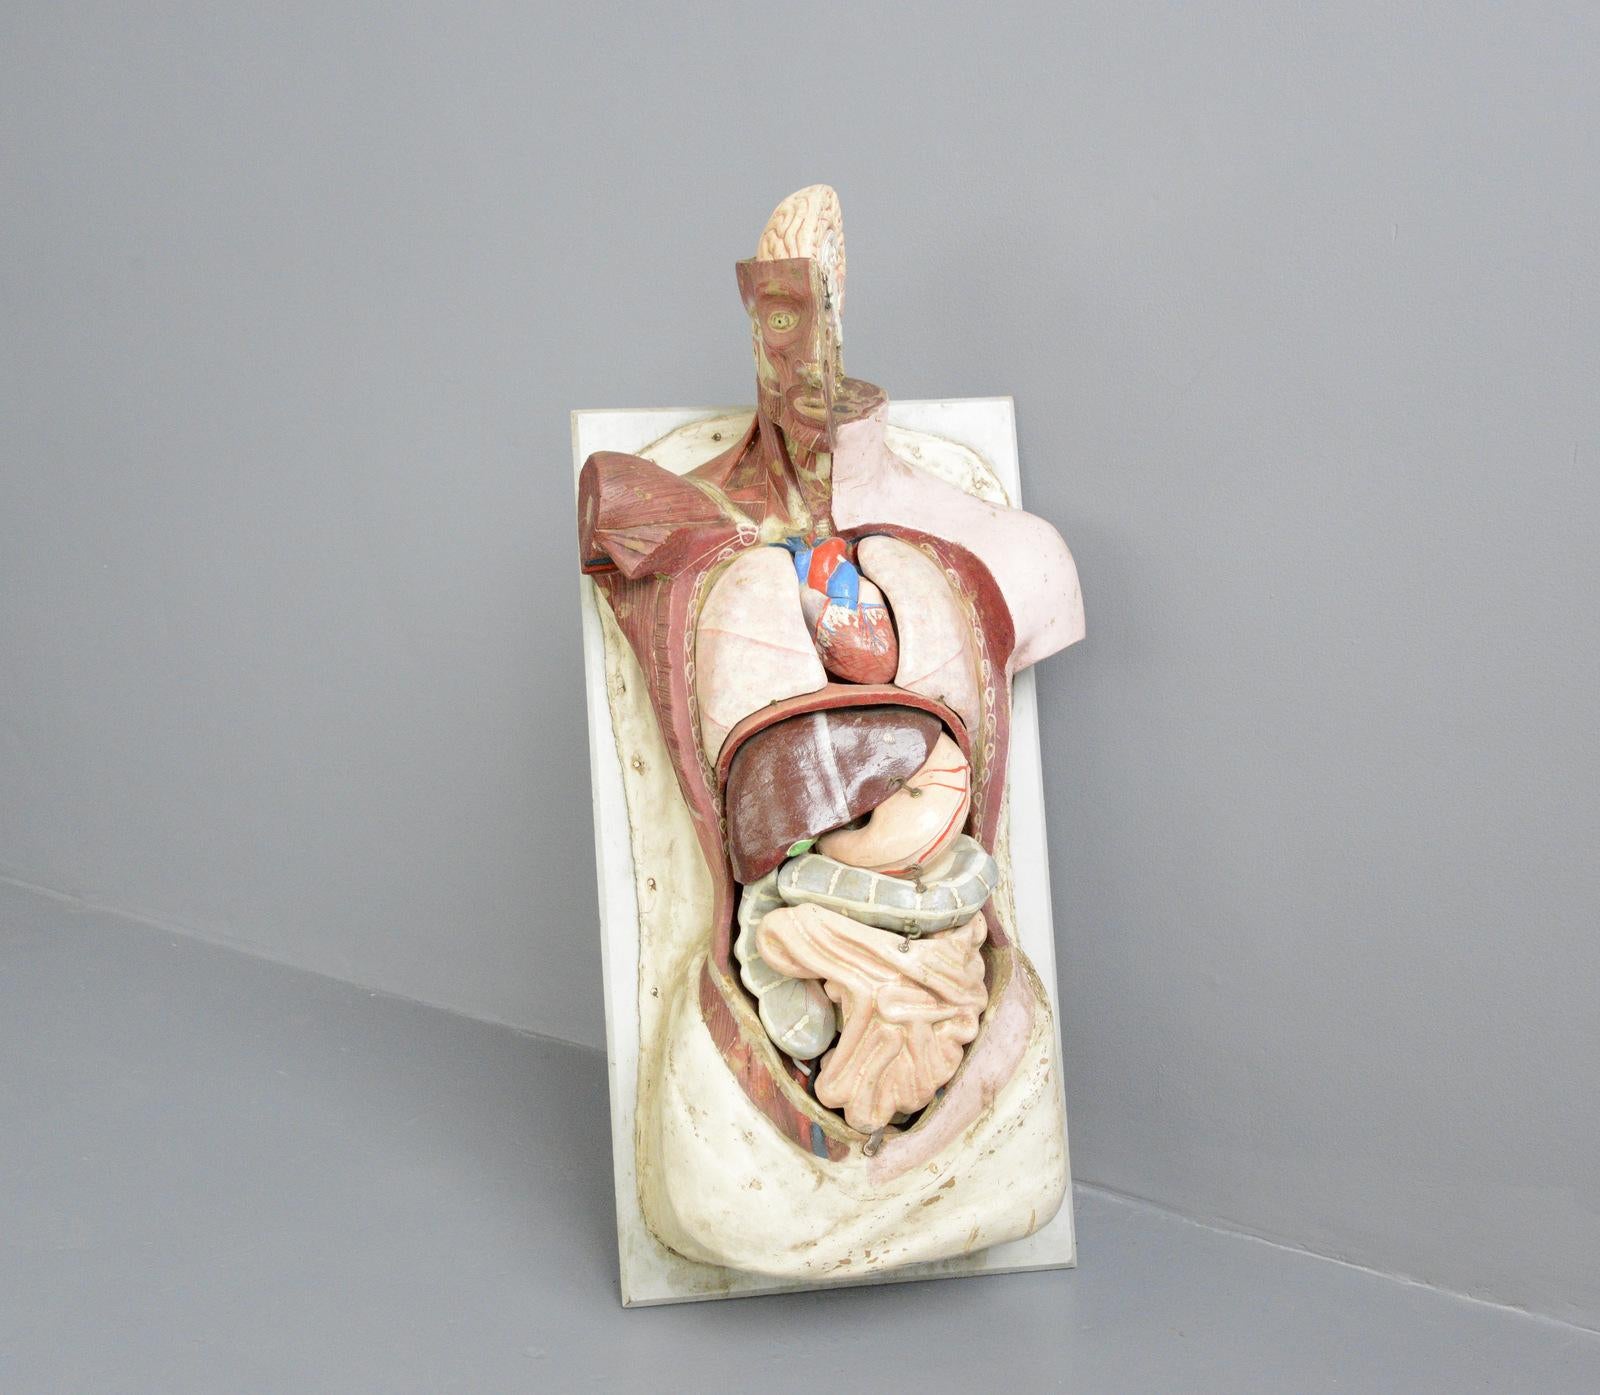 19th Century Anatomical Model by Dr Auzoux 1